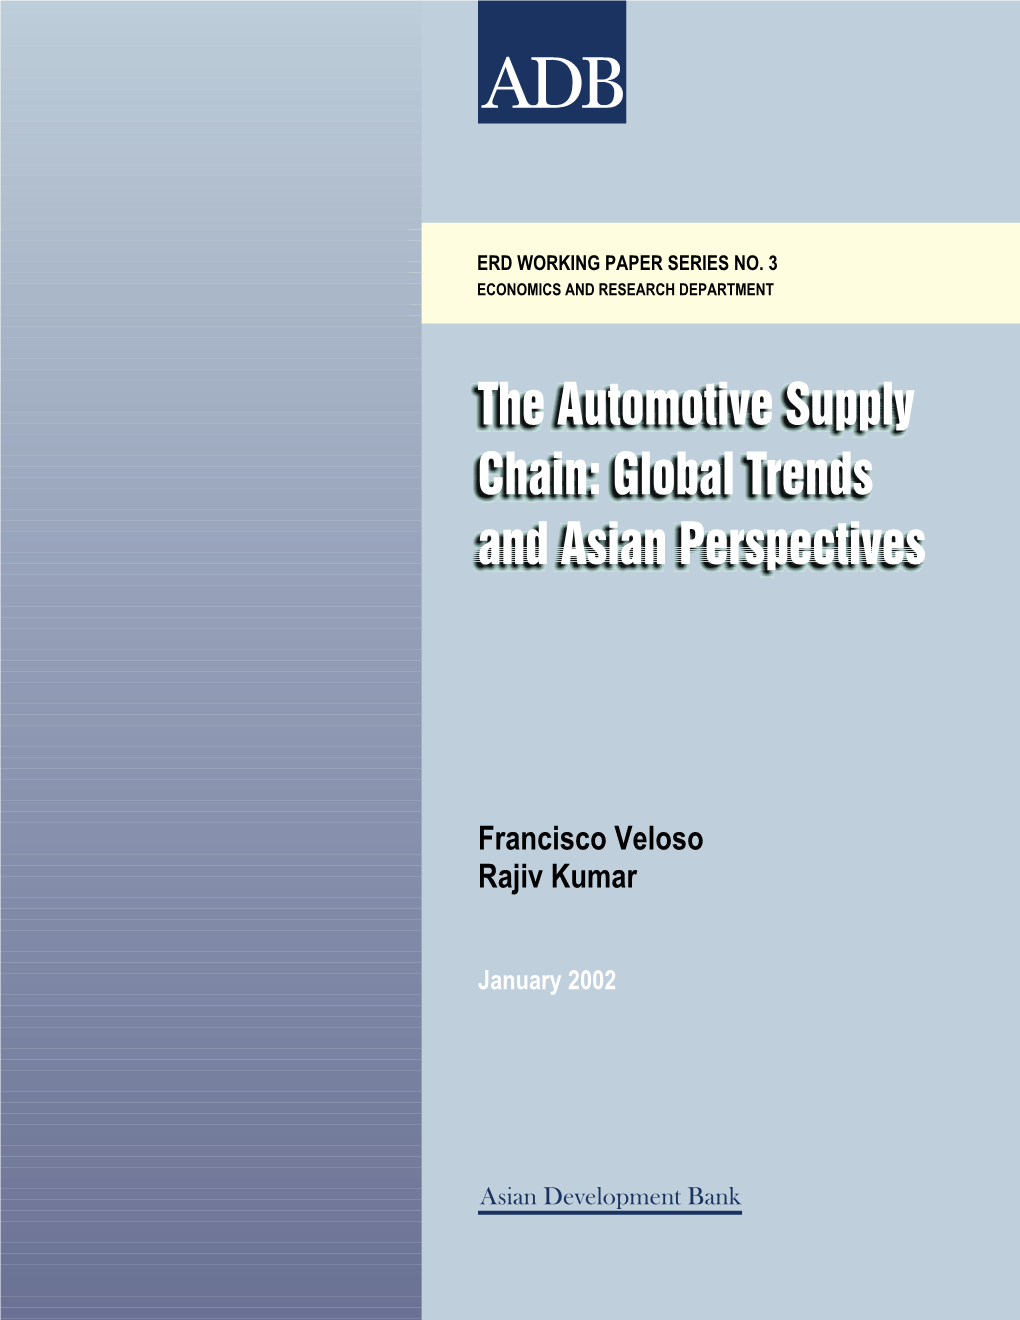 The Automotive Supply Chain: Global Trends and Asian Perspectives